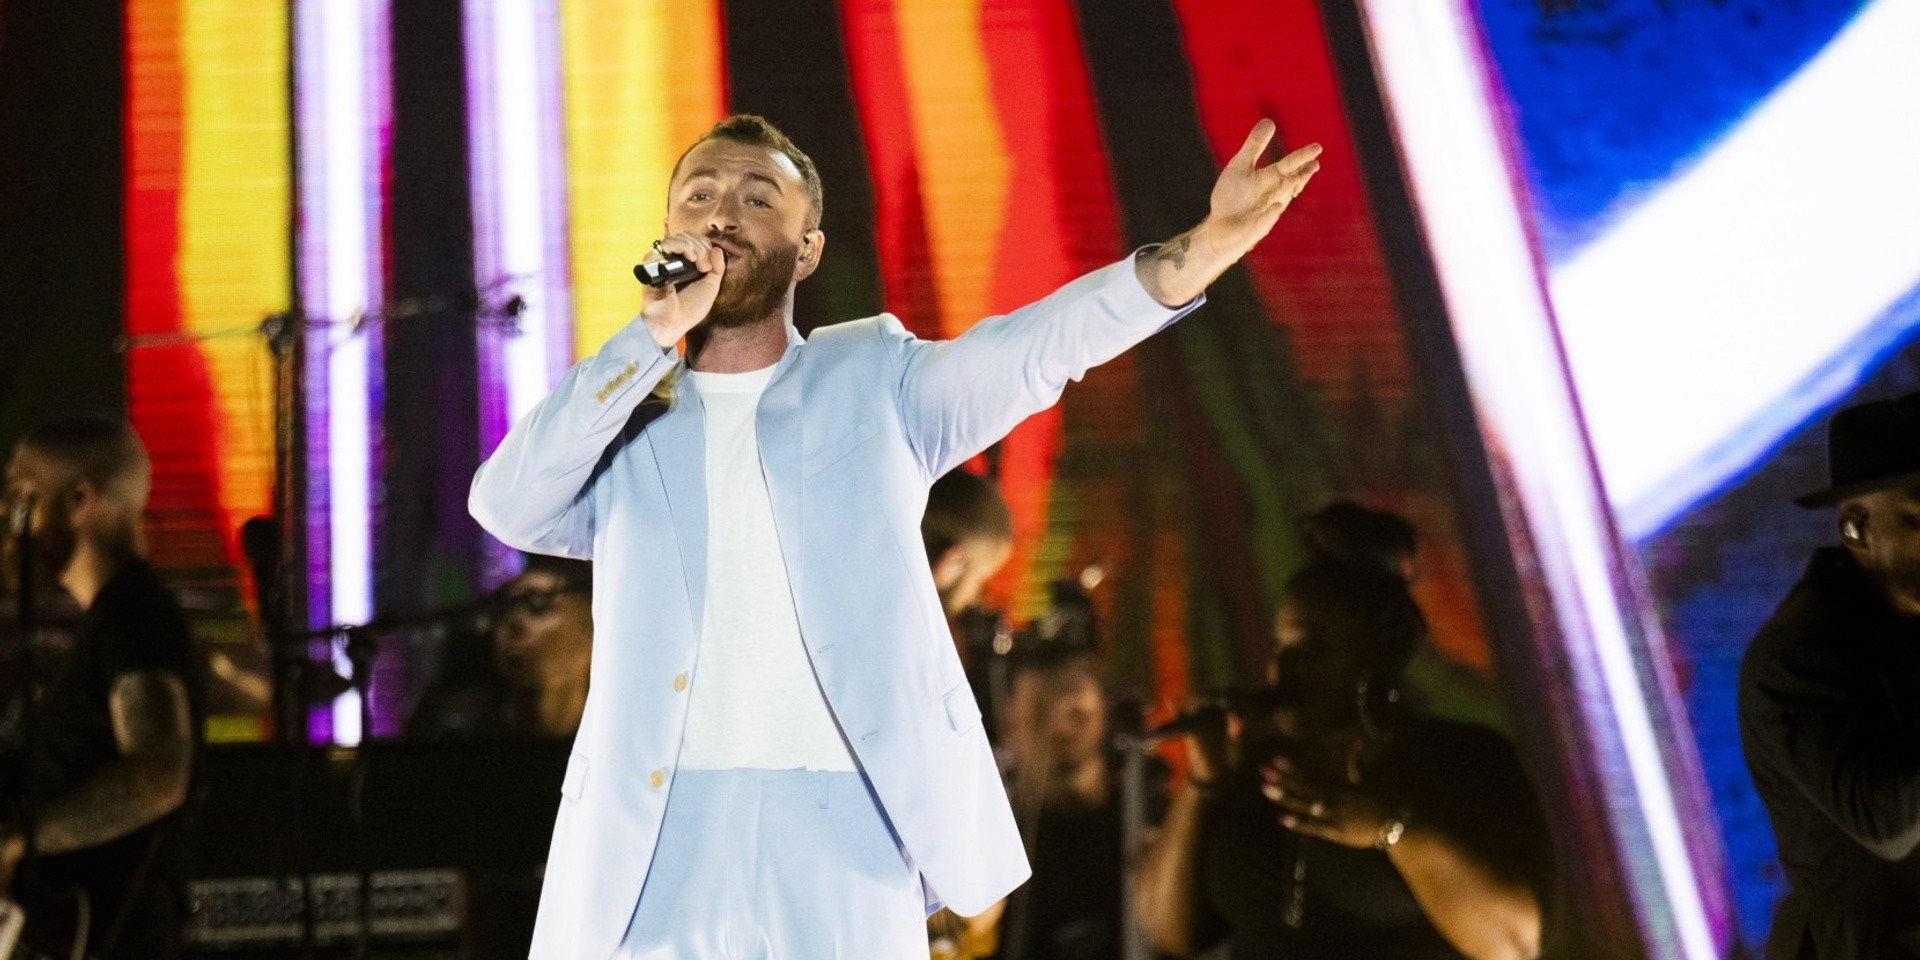 Sam Smith spreads love in debut Singapore shows – gig report